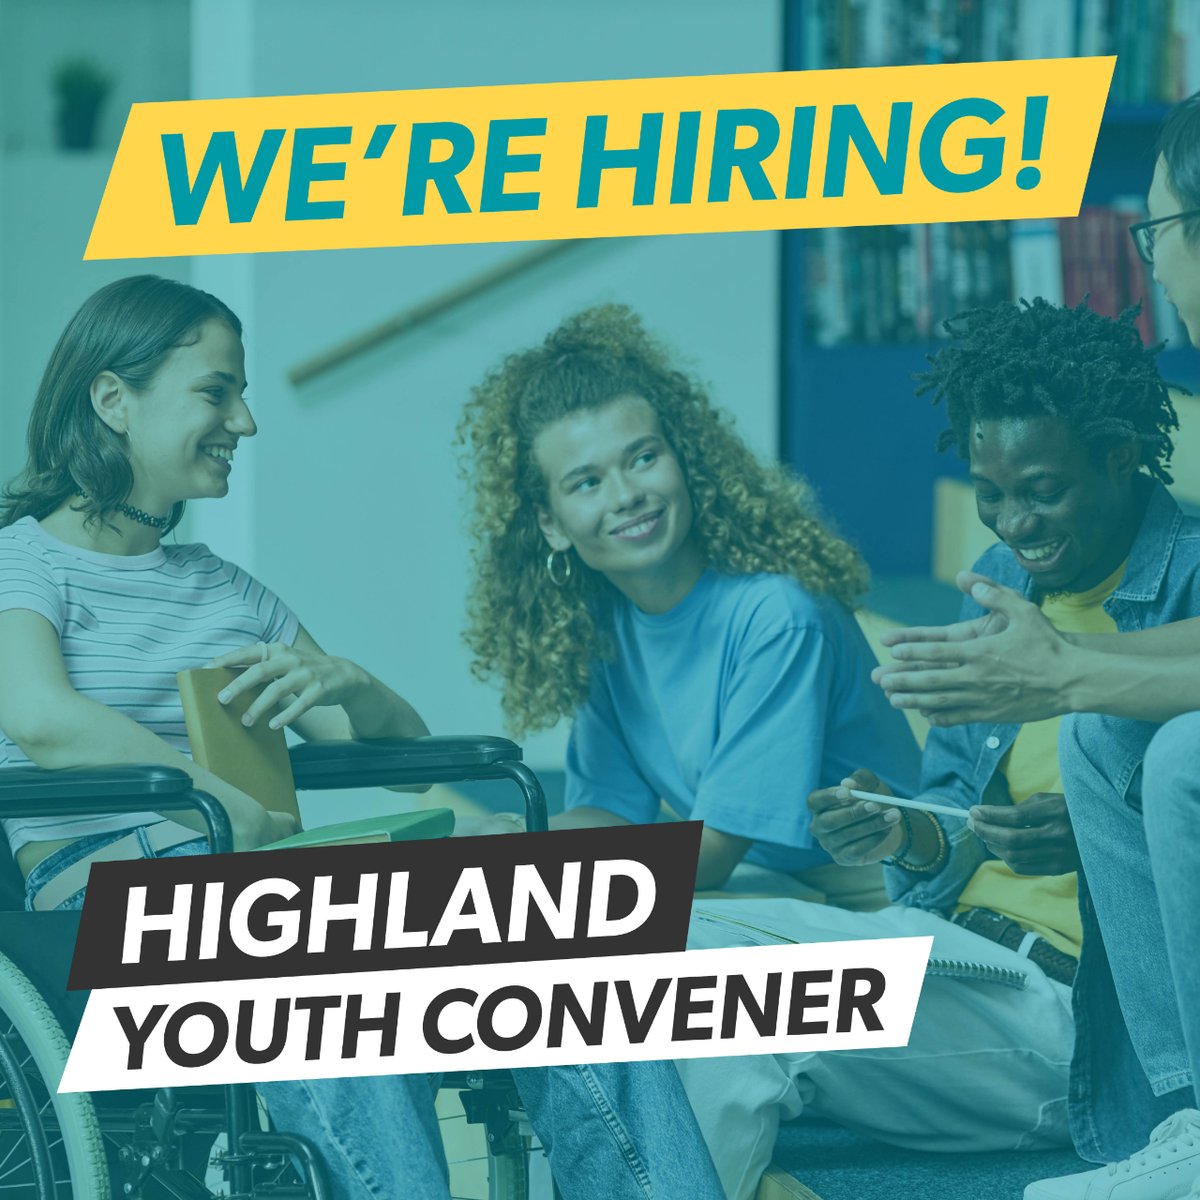 We're hiring ✨ 🔍 We are looking for the next Highland Youth Convener To find out more about the role and to apply, click the link below! hlh.scot/3Un6dZd #MakingLifeBetter